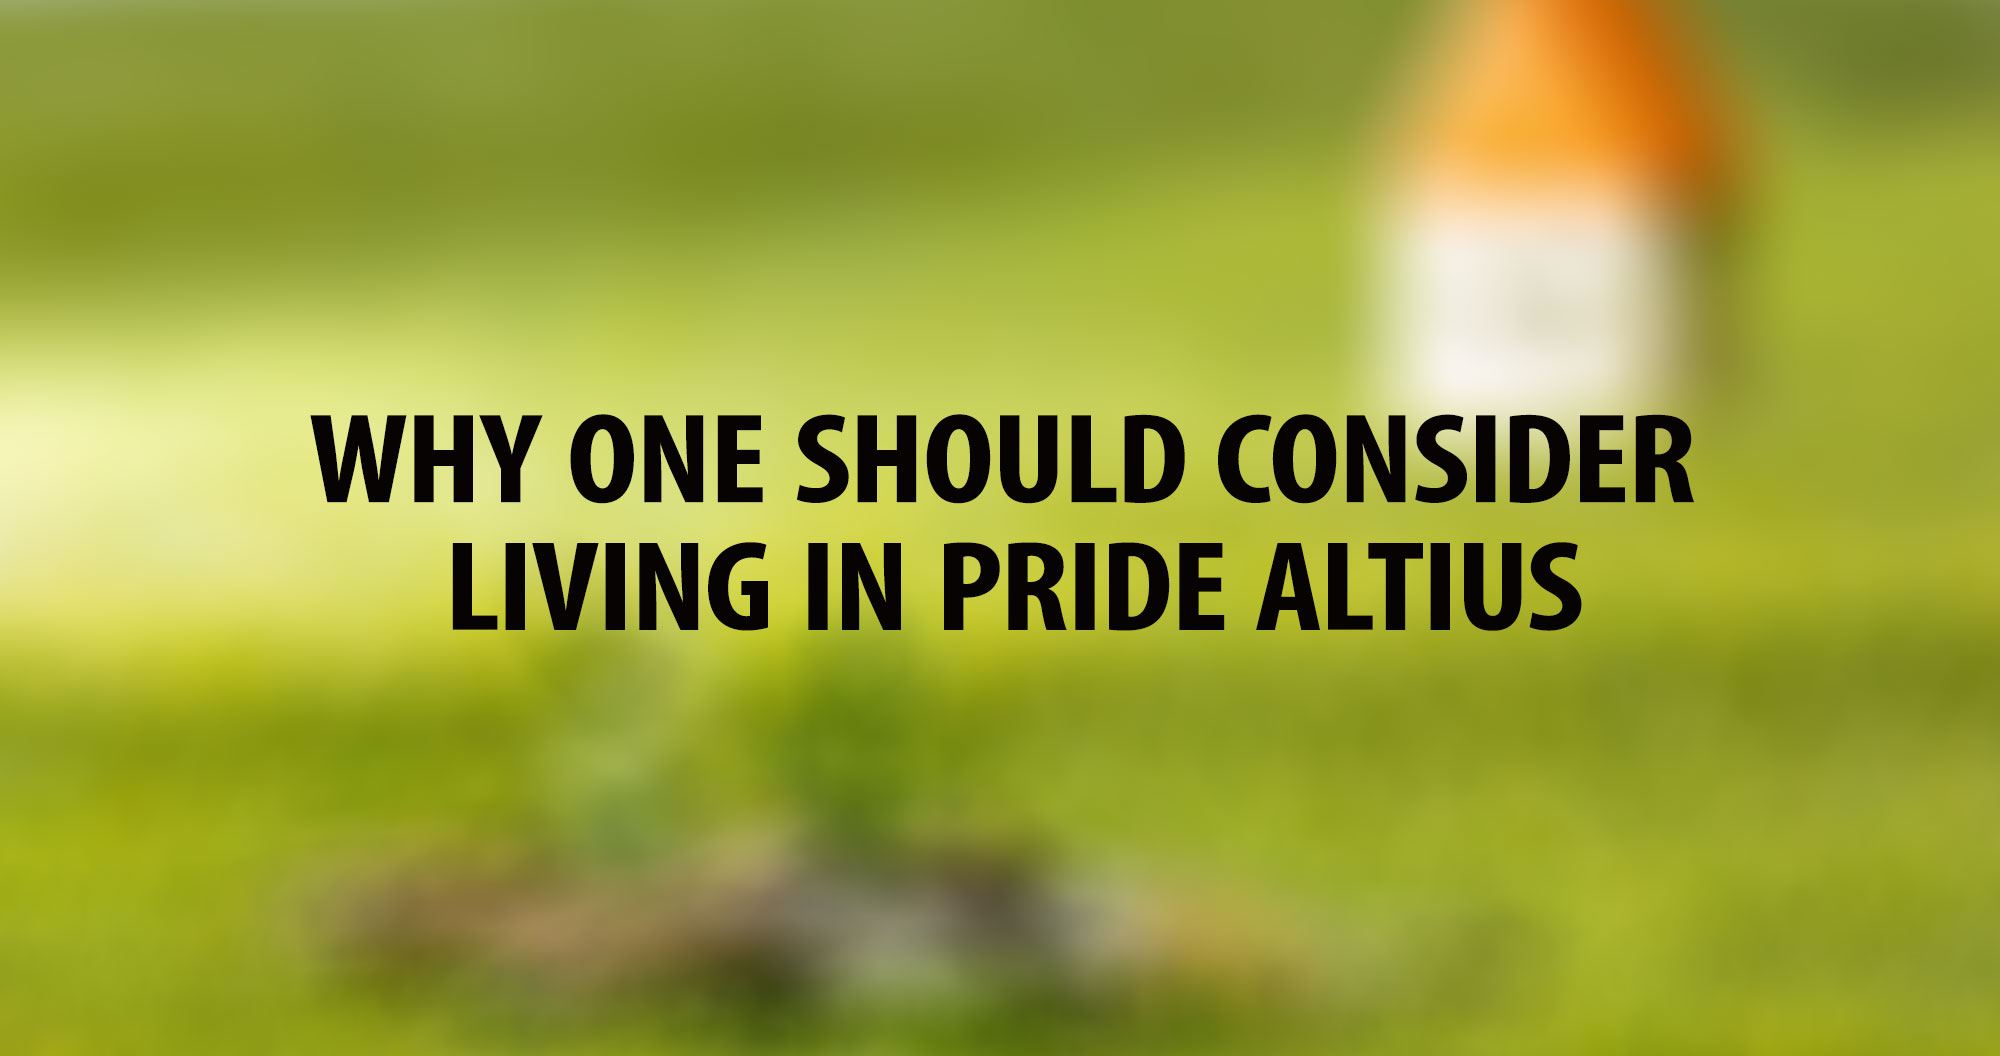 Why one should consider living in Pride Altius